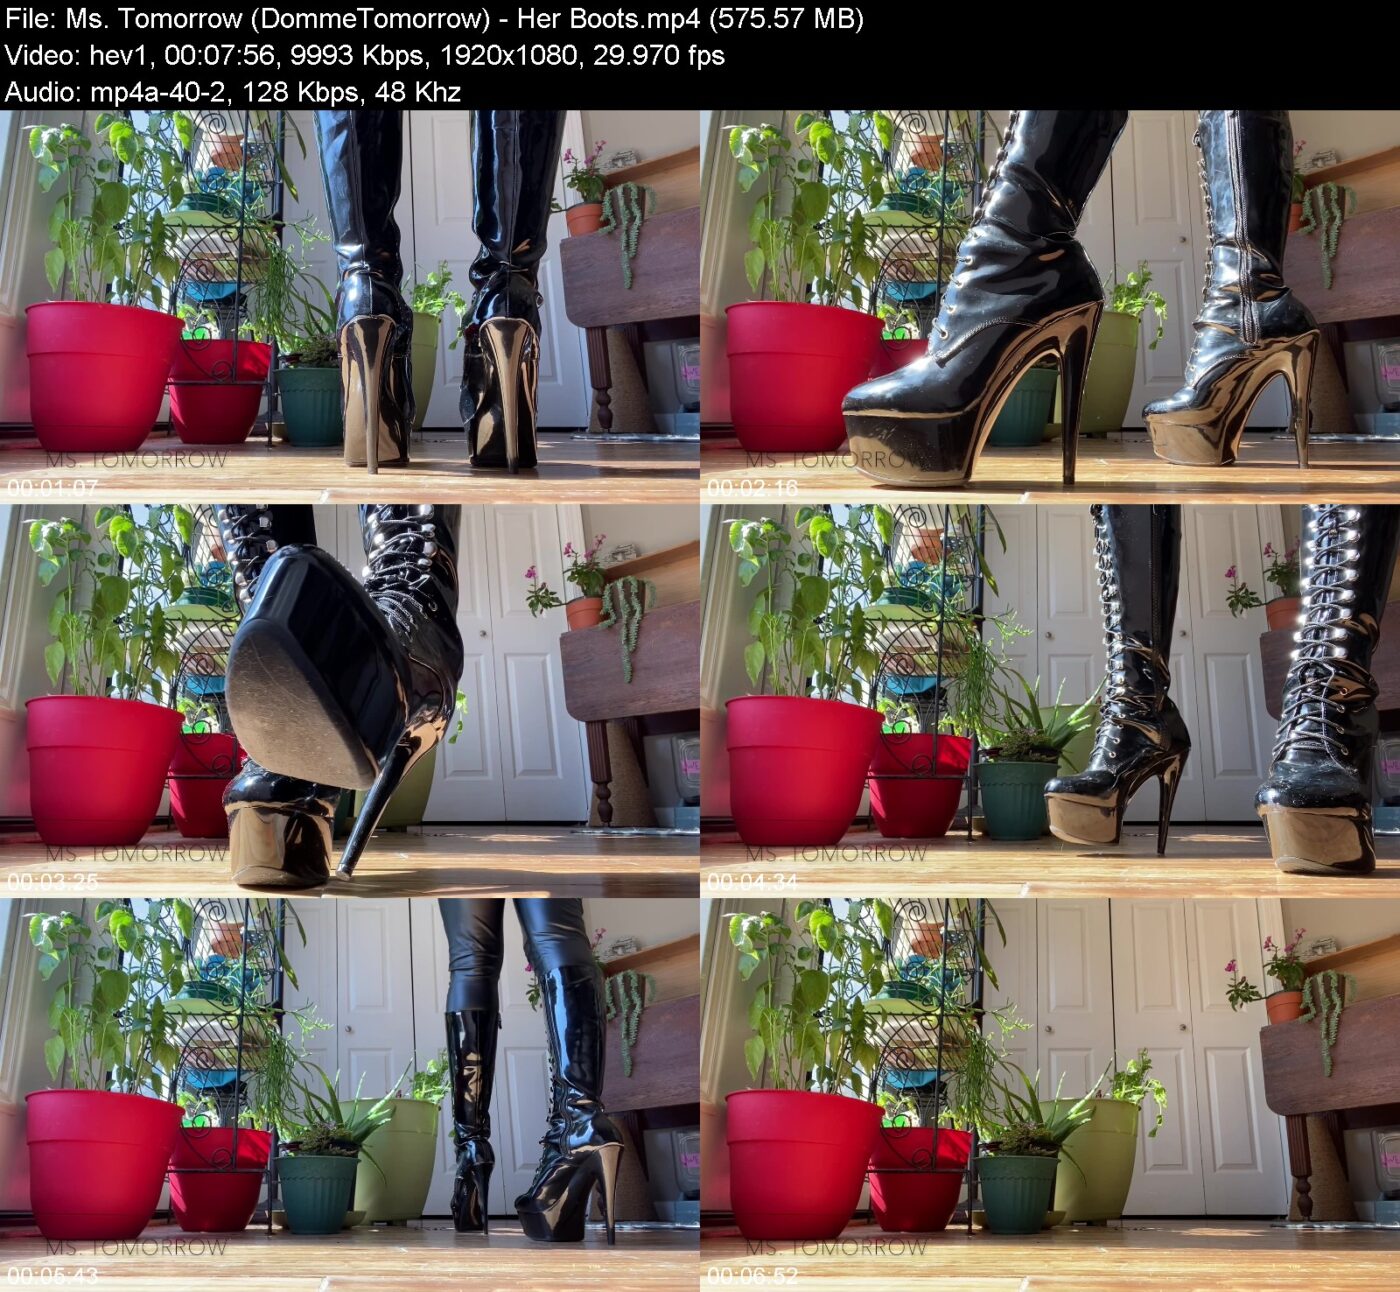 Actress: Ms. Tomorrow (DommeTomorrow). Title and Studio: Her Boots